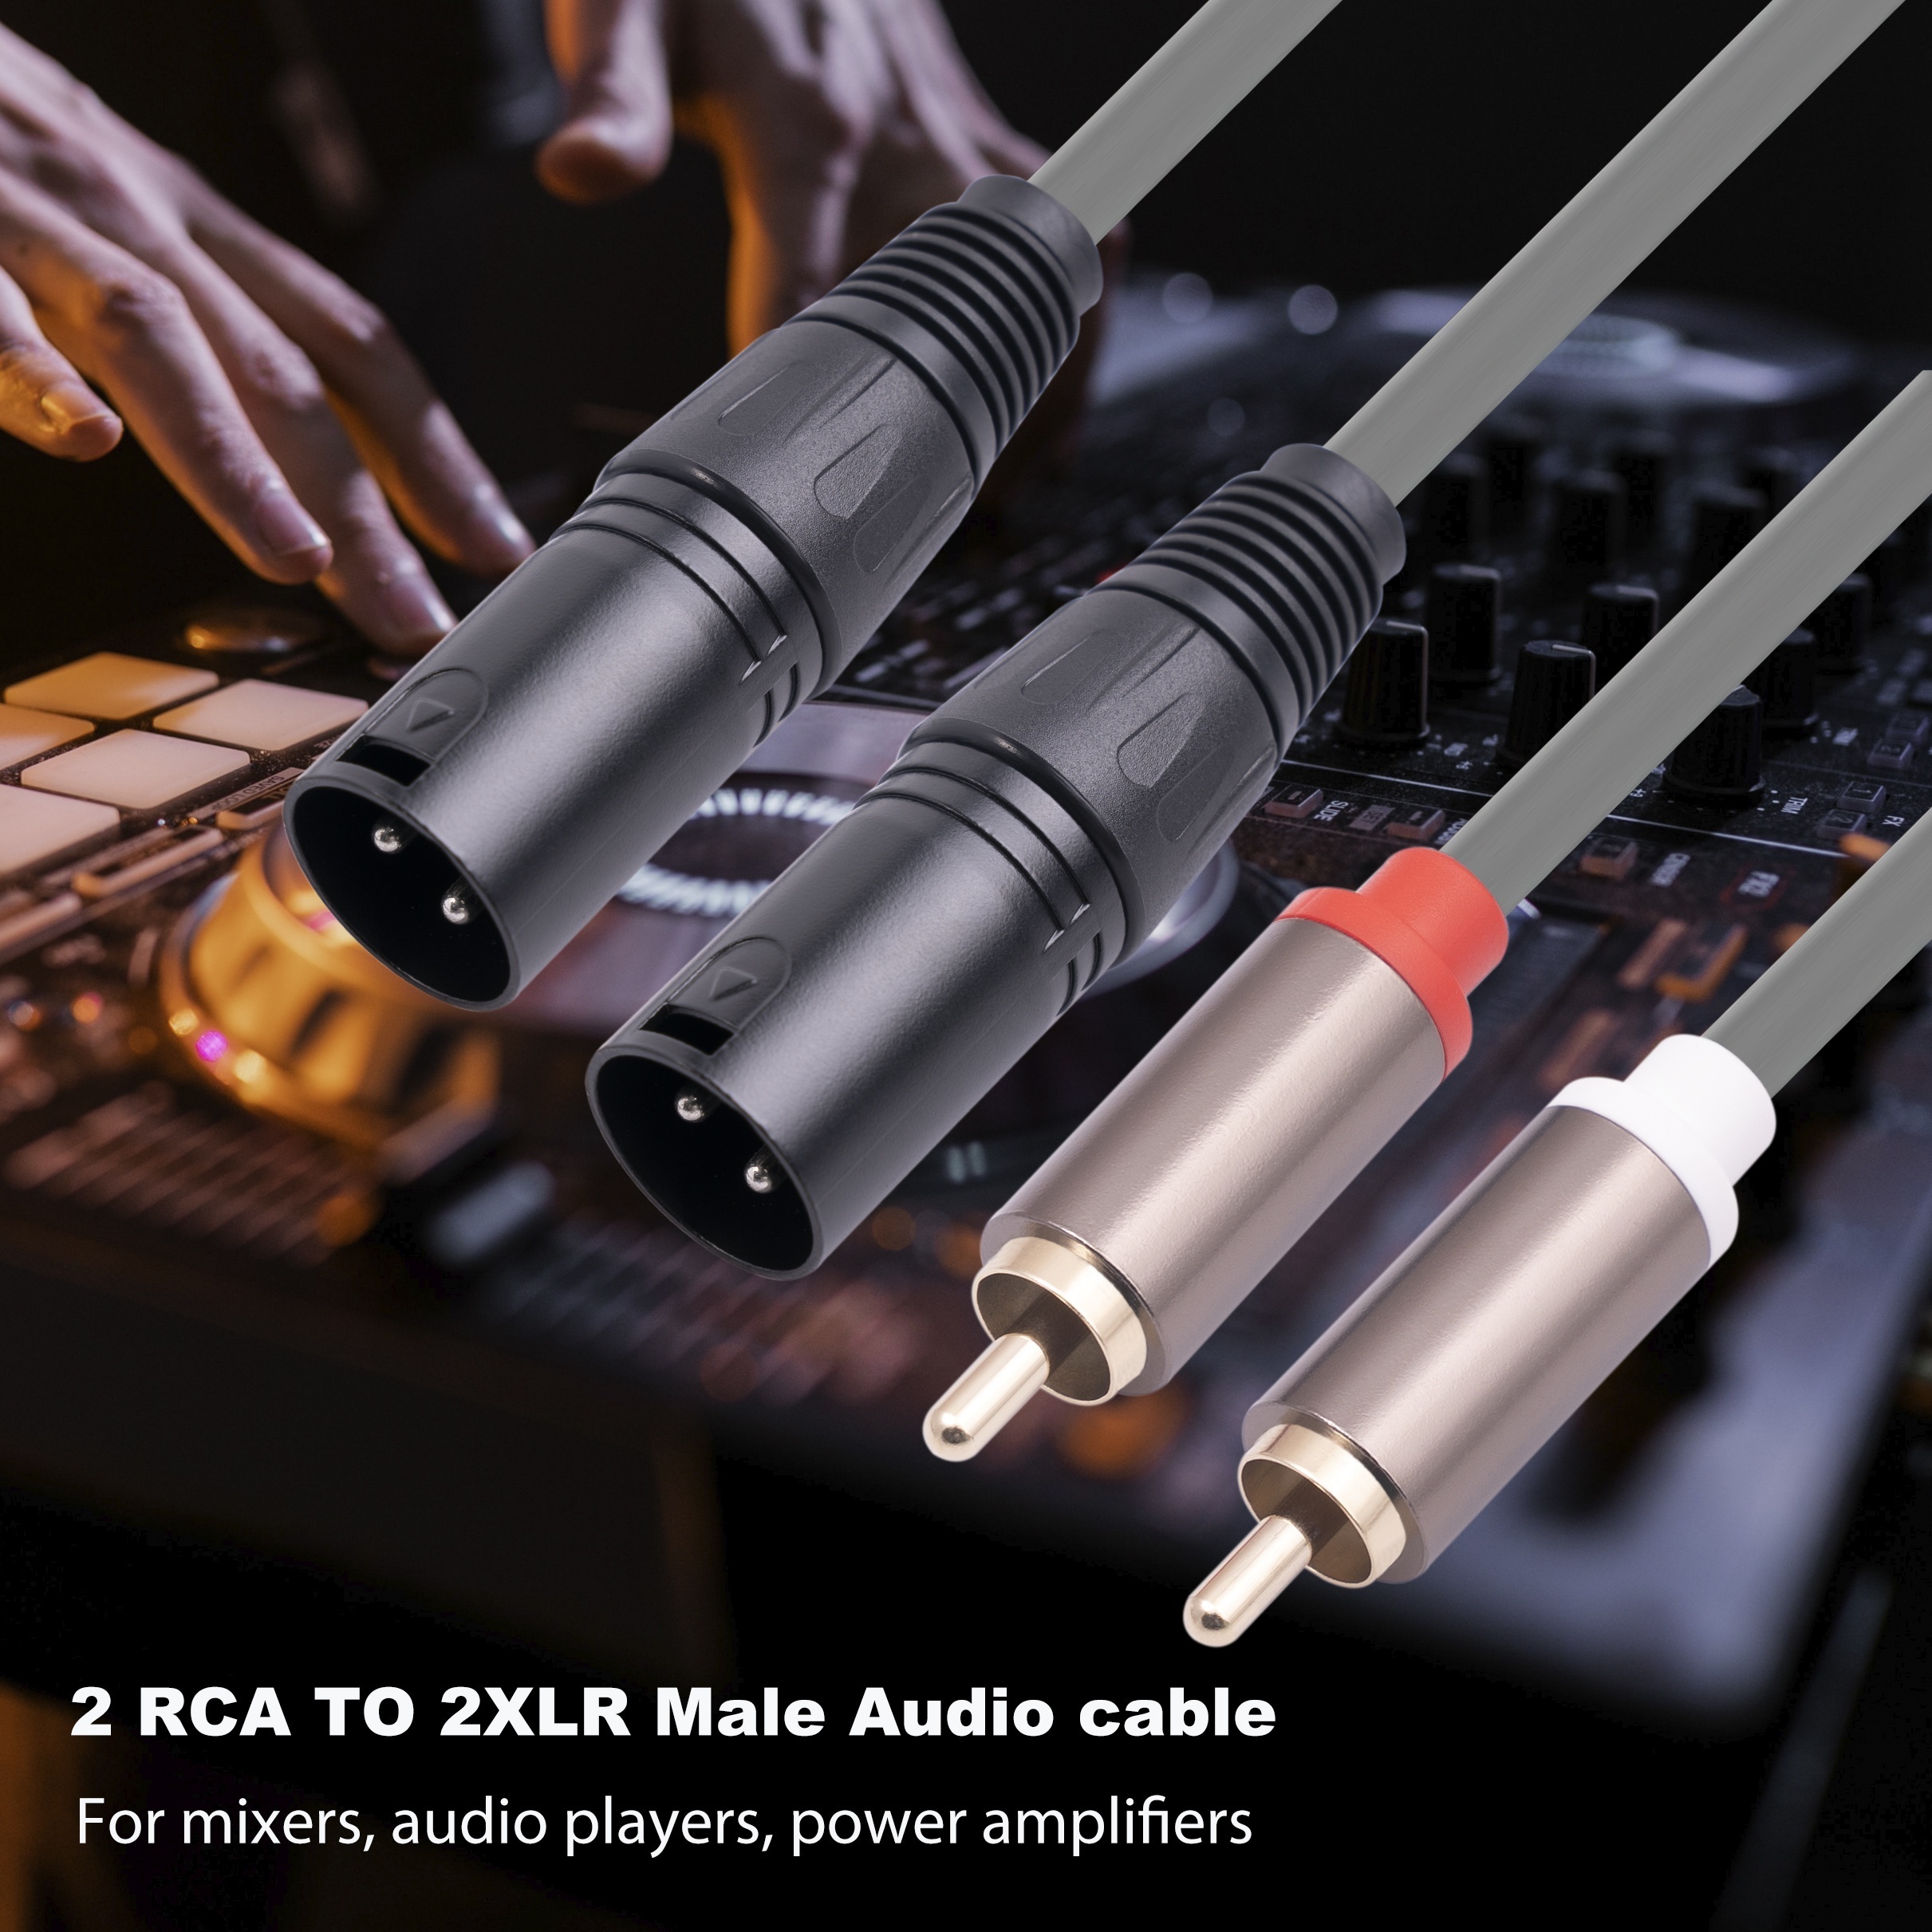 3.5 mm to RCA AV Camcorder Video Cable,3.5mm 18 TRRS Male to 3 RCA Male  Plug Adapter Cord for TV,Smartphones,MP3, Tablets,Speakers,Home Theater 